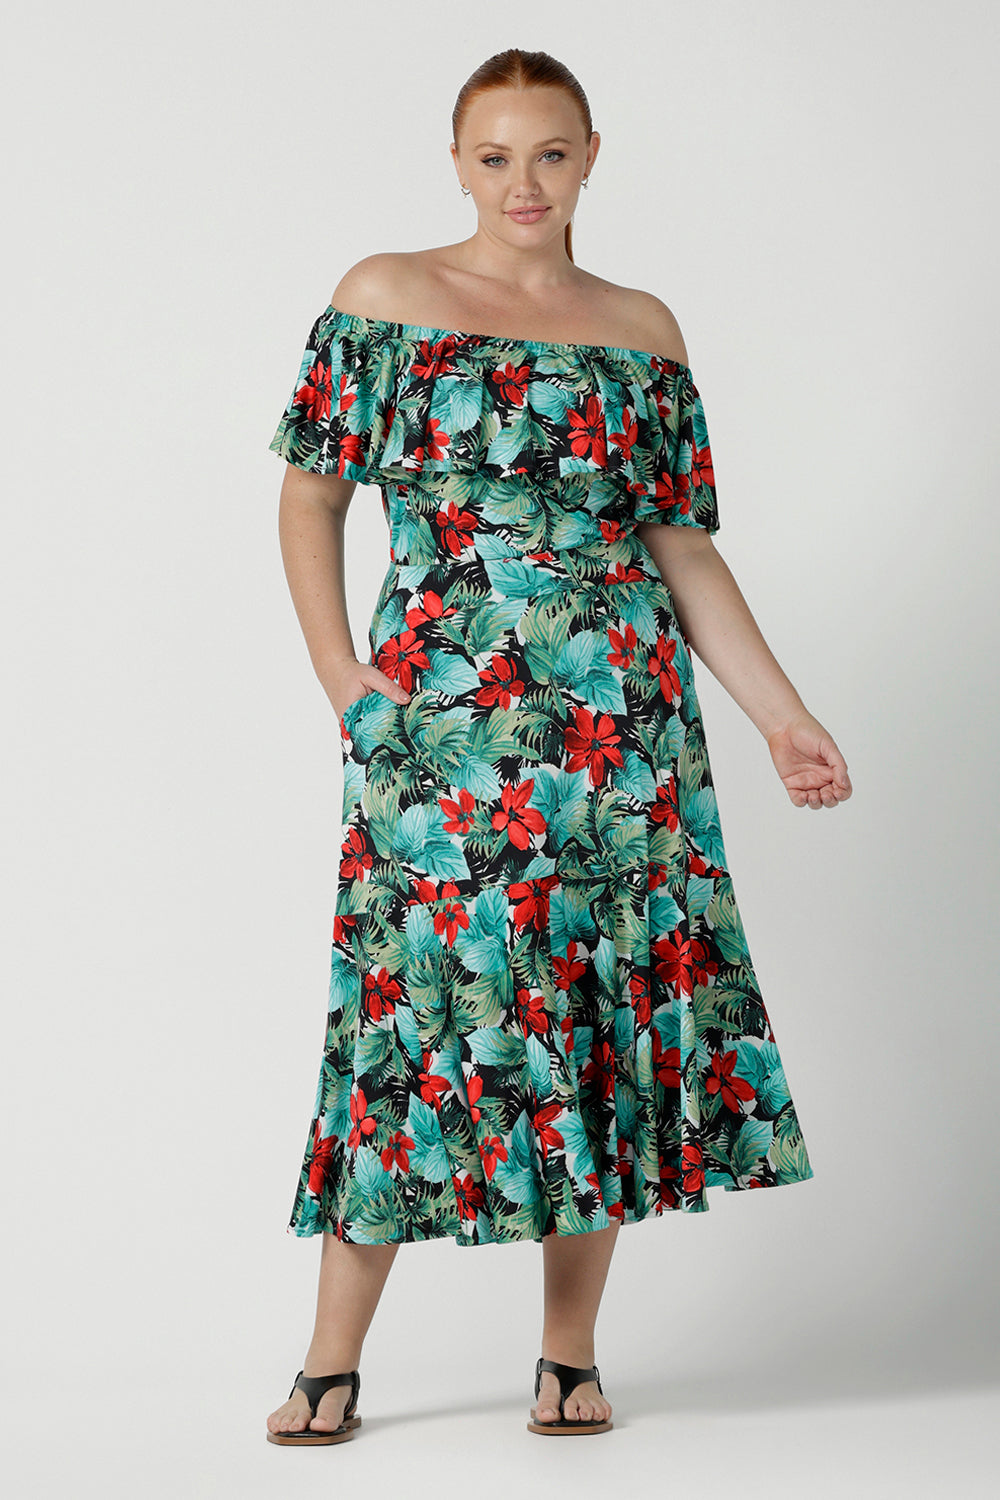 Off shoulder Briar Top in Havana on a size 12 model. Tropical print design with red flowers and green palm leaf. Soft slinky jersey. Wear this top multiple ways one shoulder, off shoulder and on shoulder. Made in Australia for women size 8 - 24.